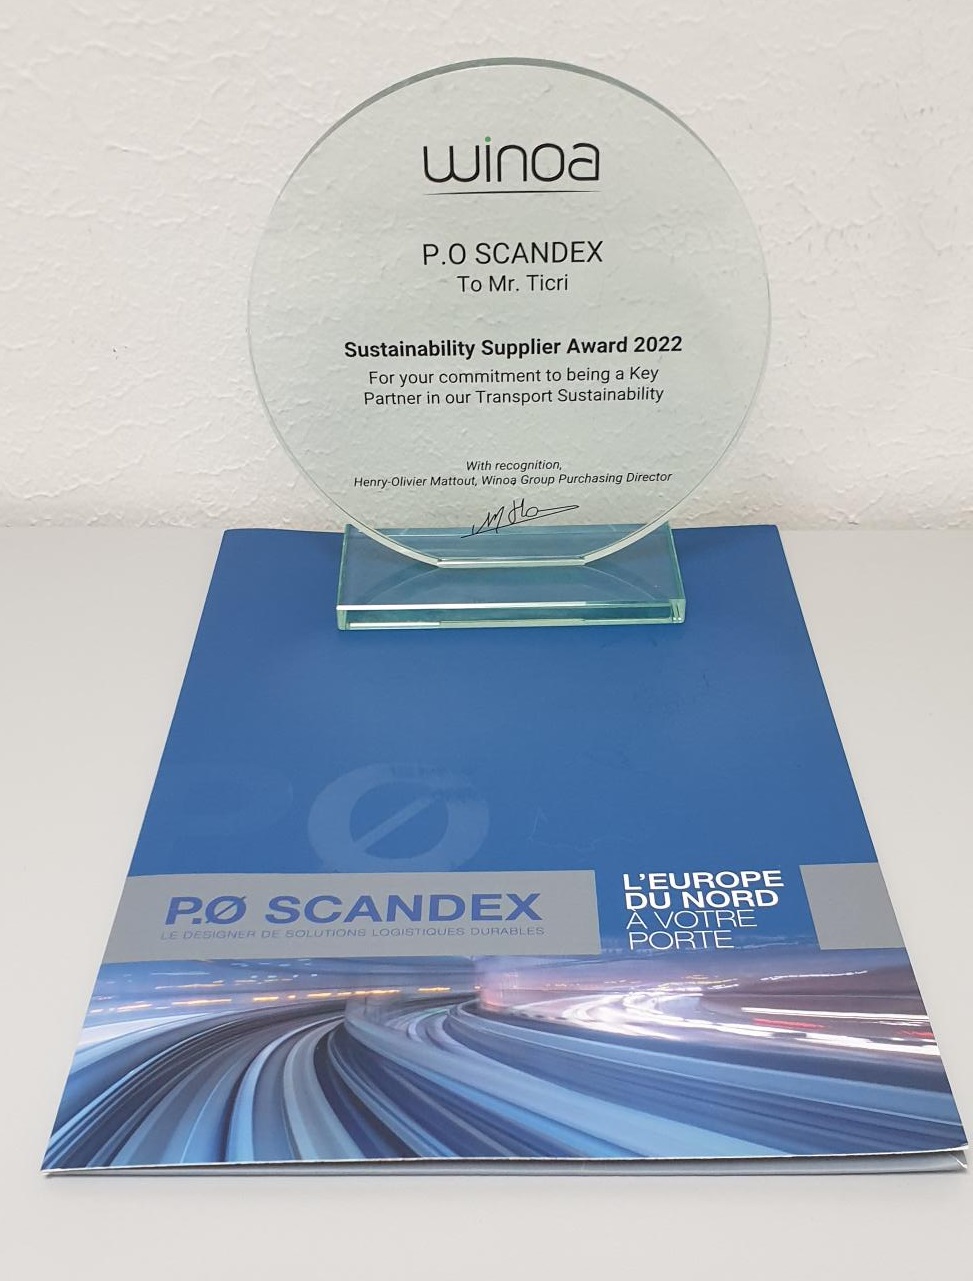 PØ SCANDEX and WINOA, a solid and innovative partnership